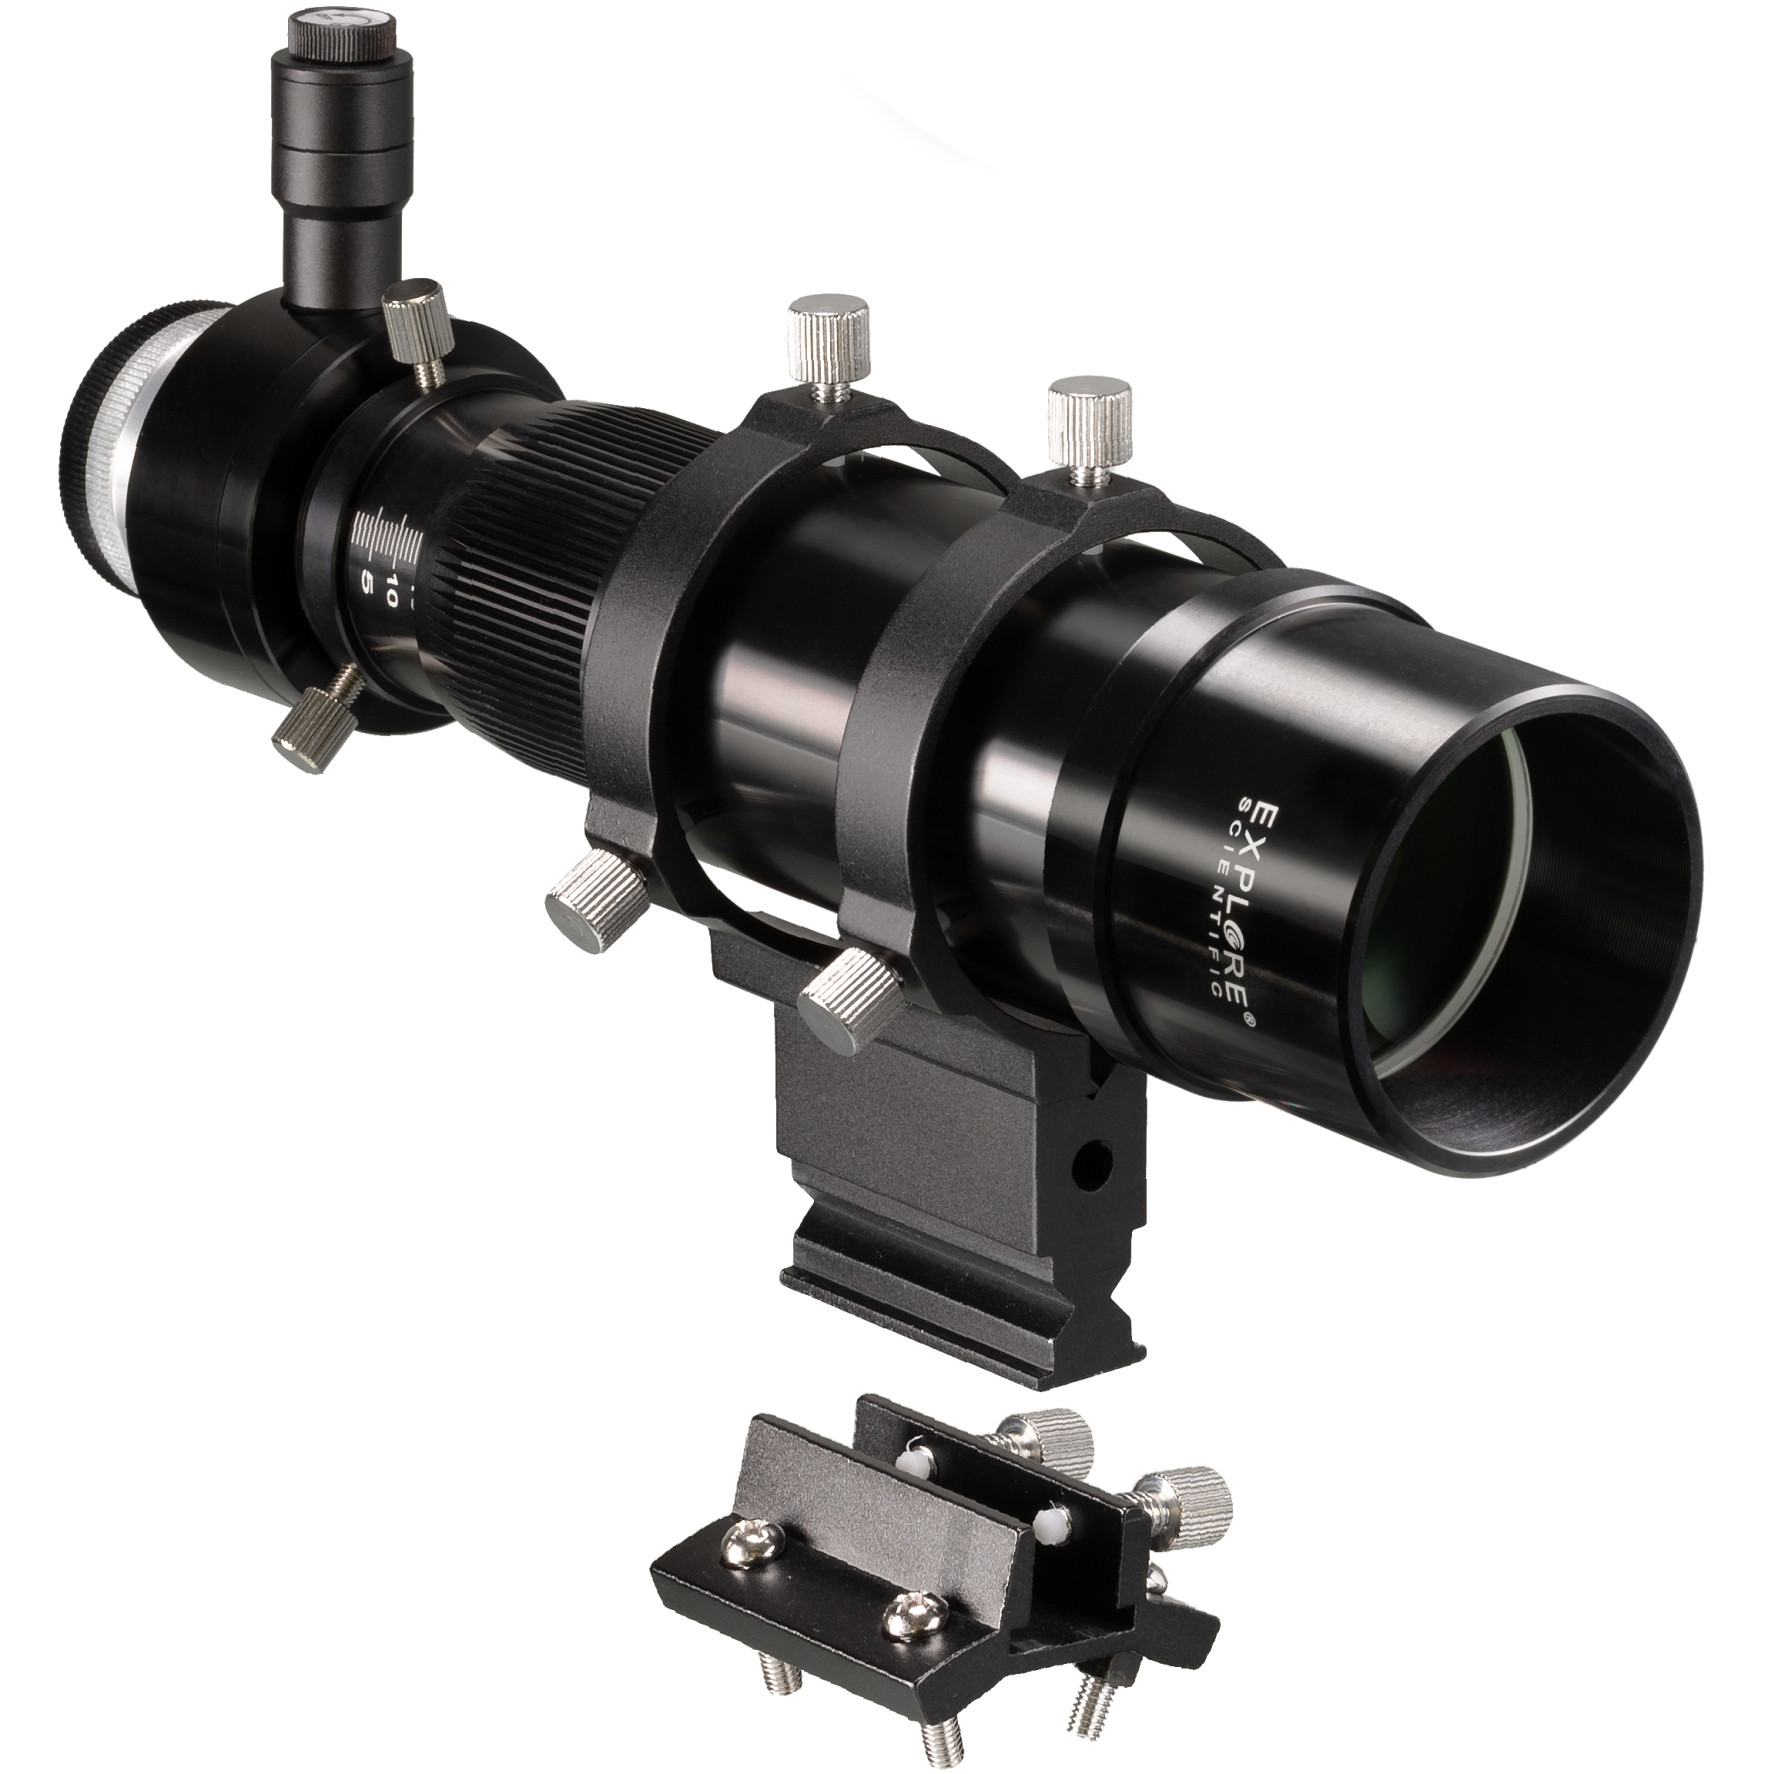 Explore Scientific 8x50 Finder and Guide Scope with Helical Focuser 1.25 inch and T2